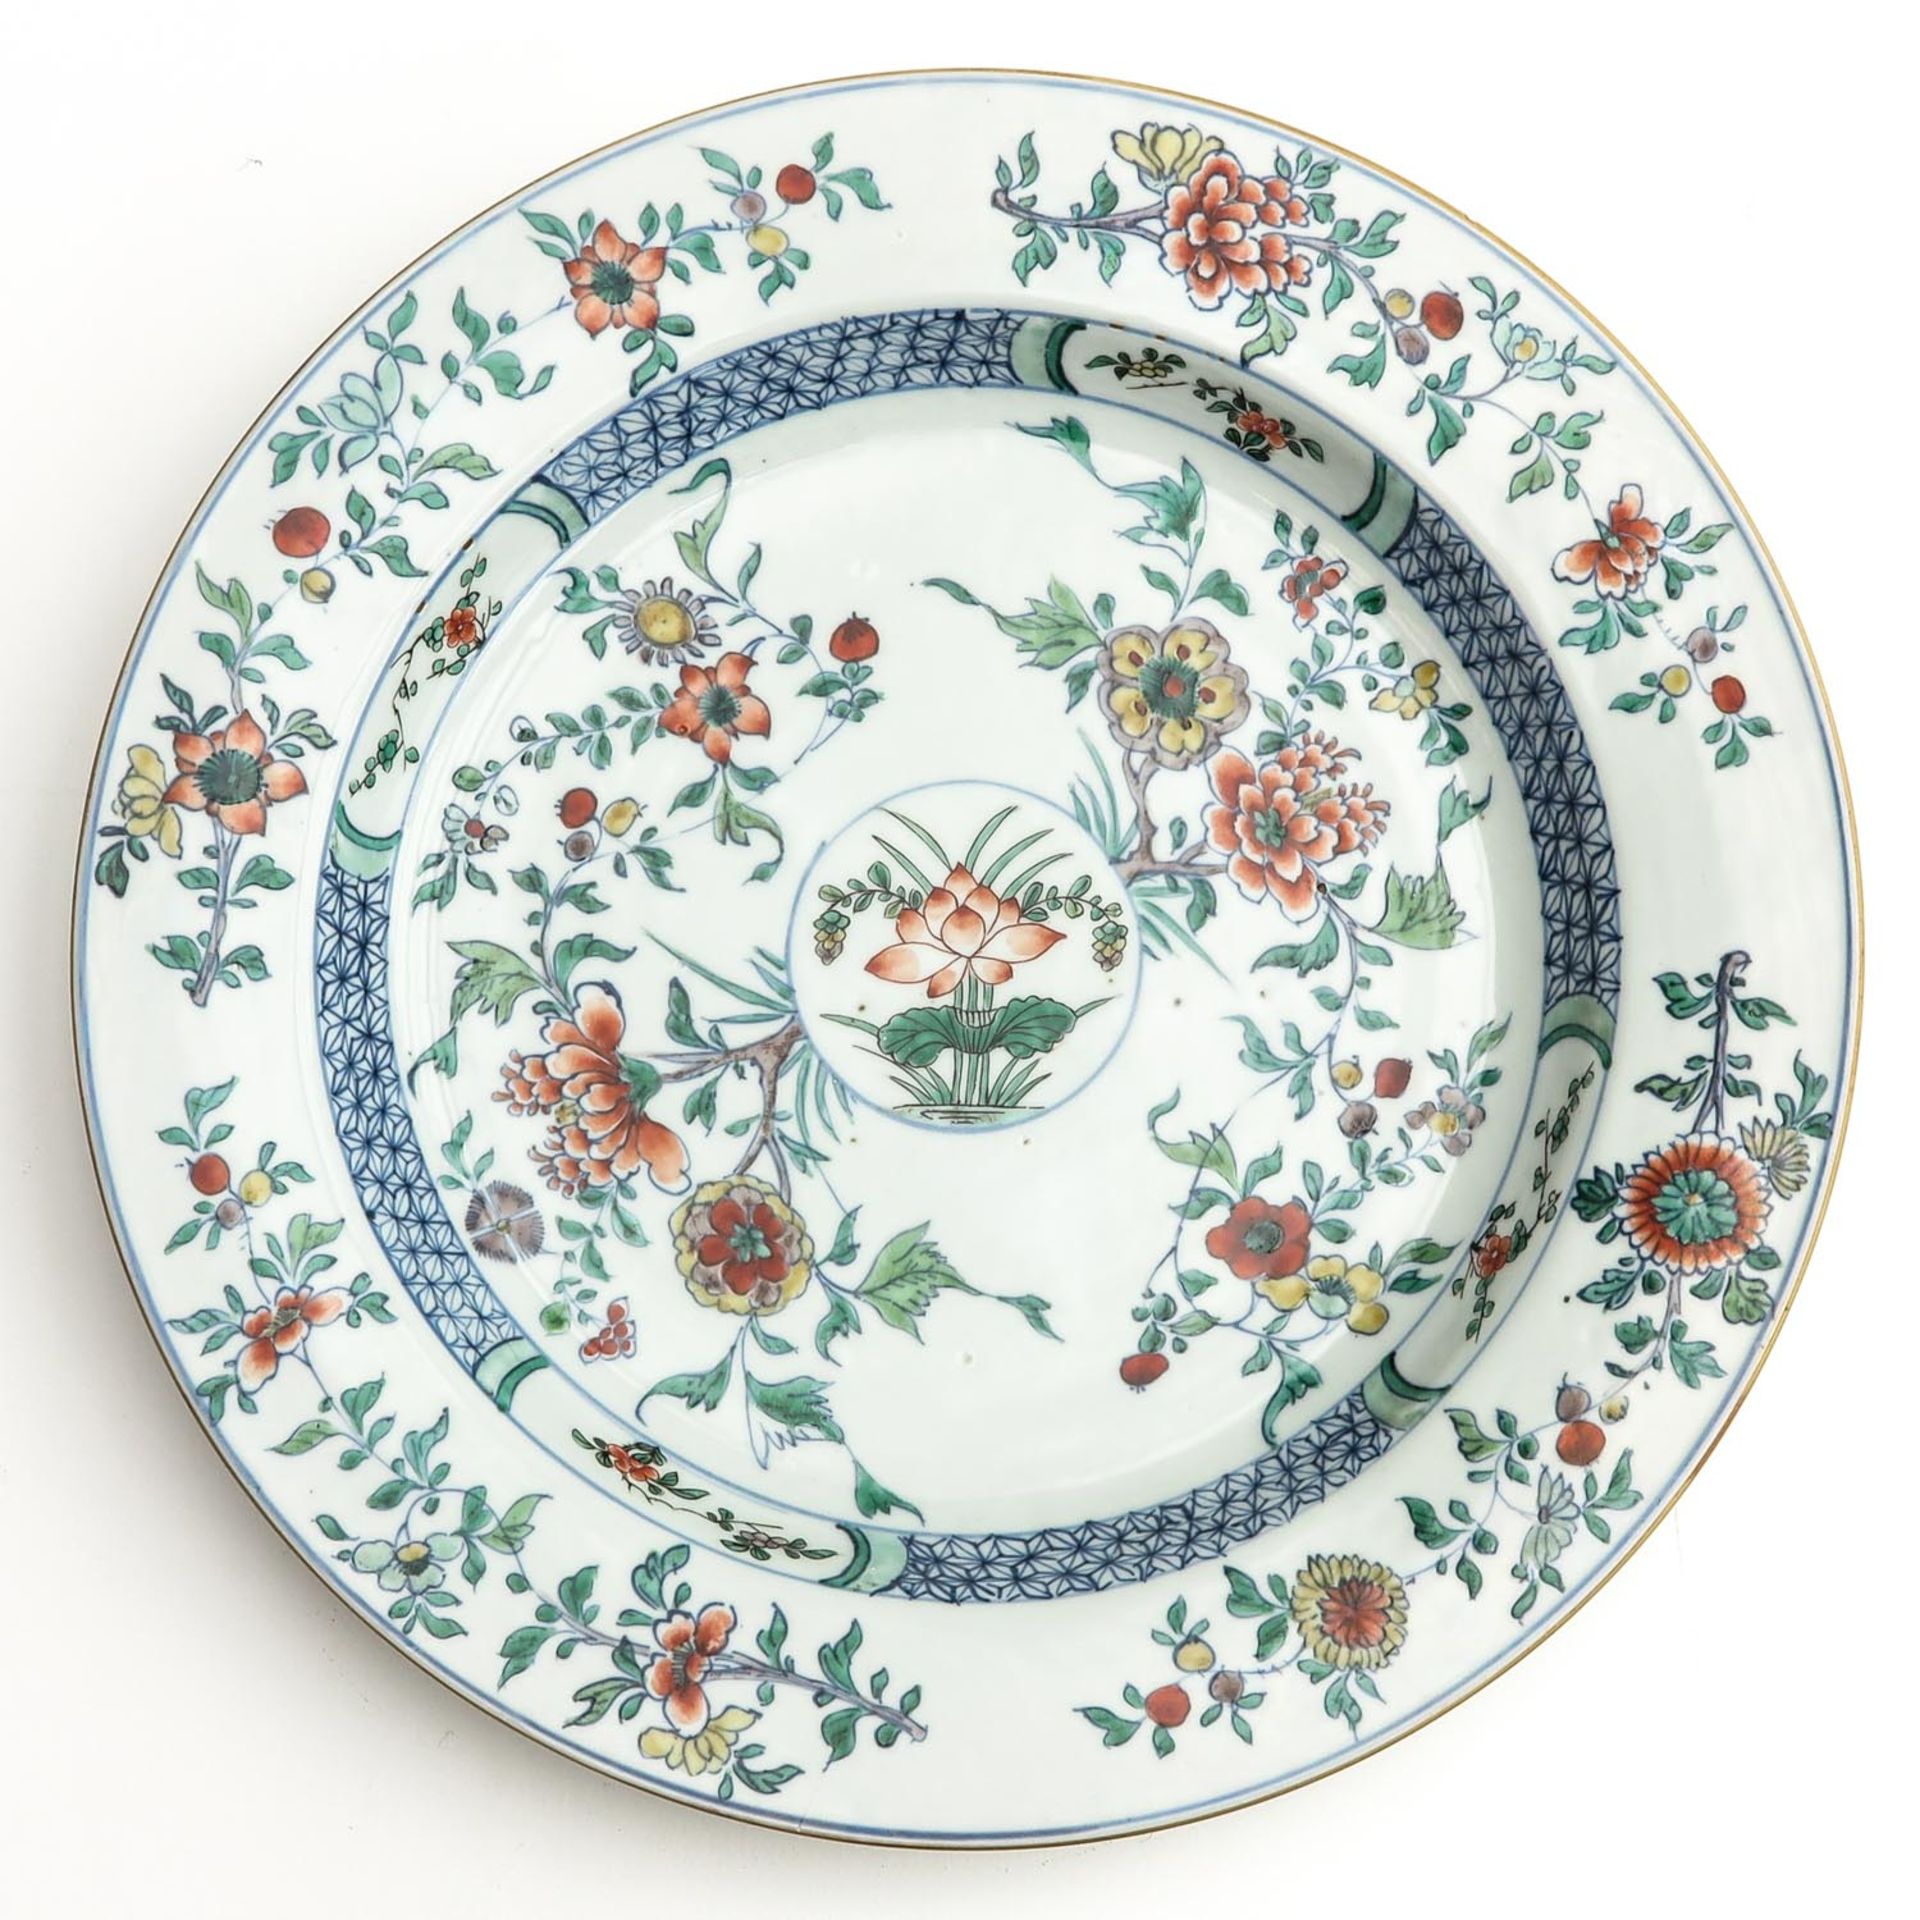 A Doucai Decor Charger and Plate - Image 3 of 10